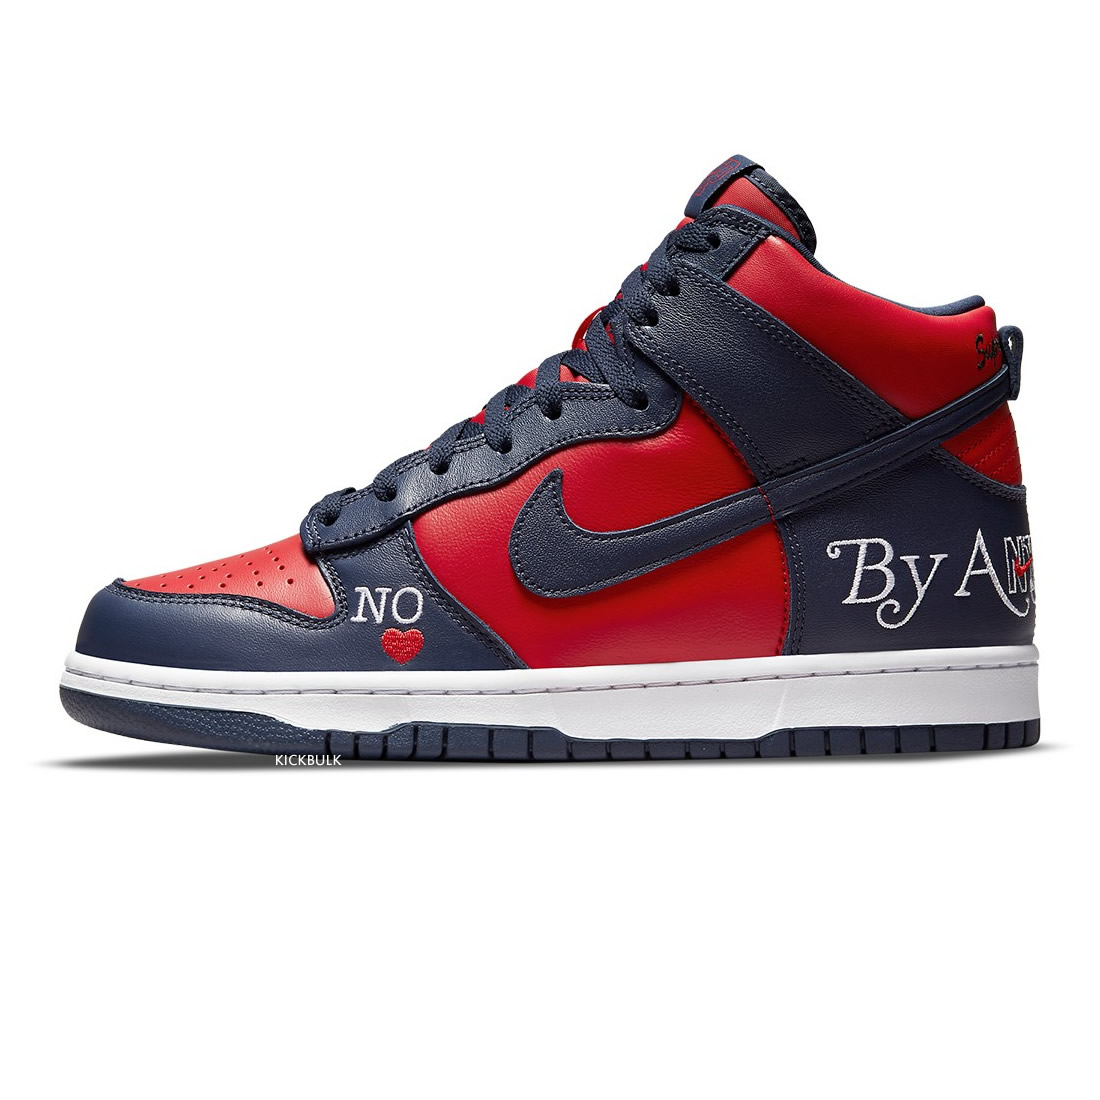 Supreme Nike Dunk High Sb By Any Means Red Navy Dn3741 600 1 - www.kickbulk.cc